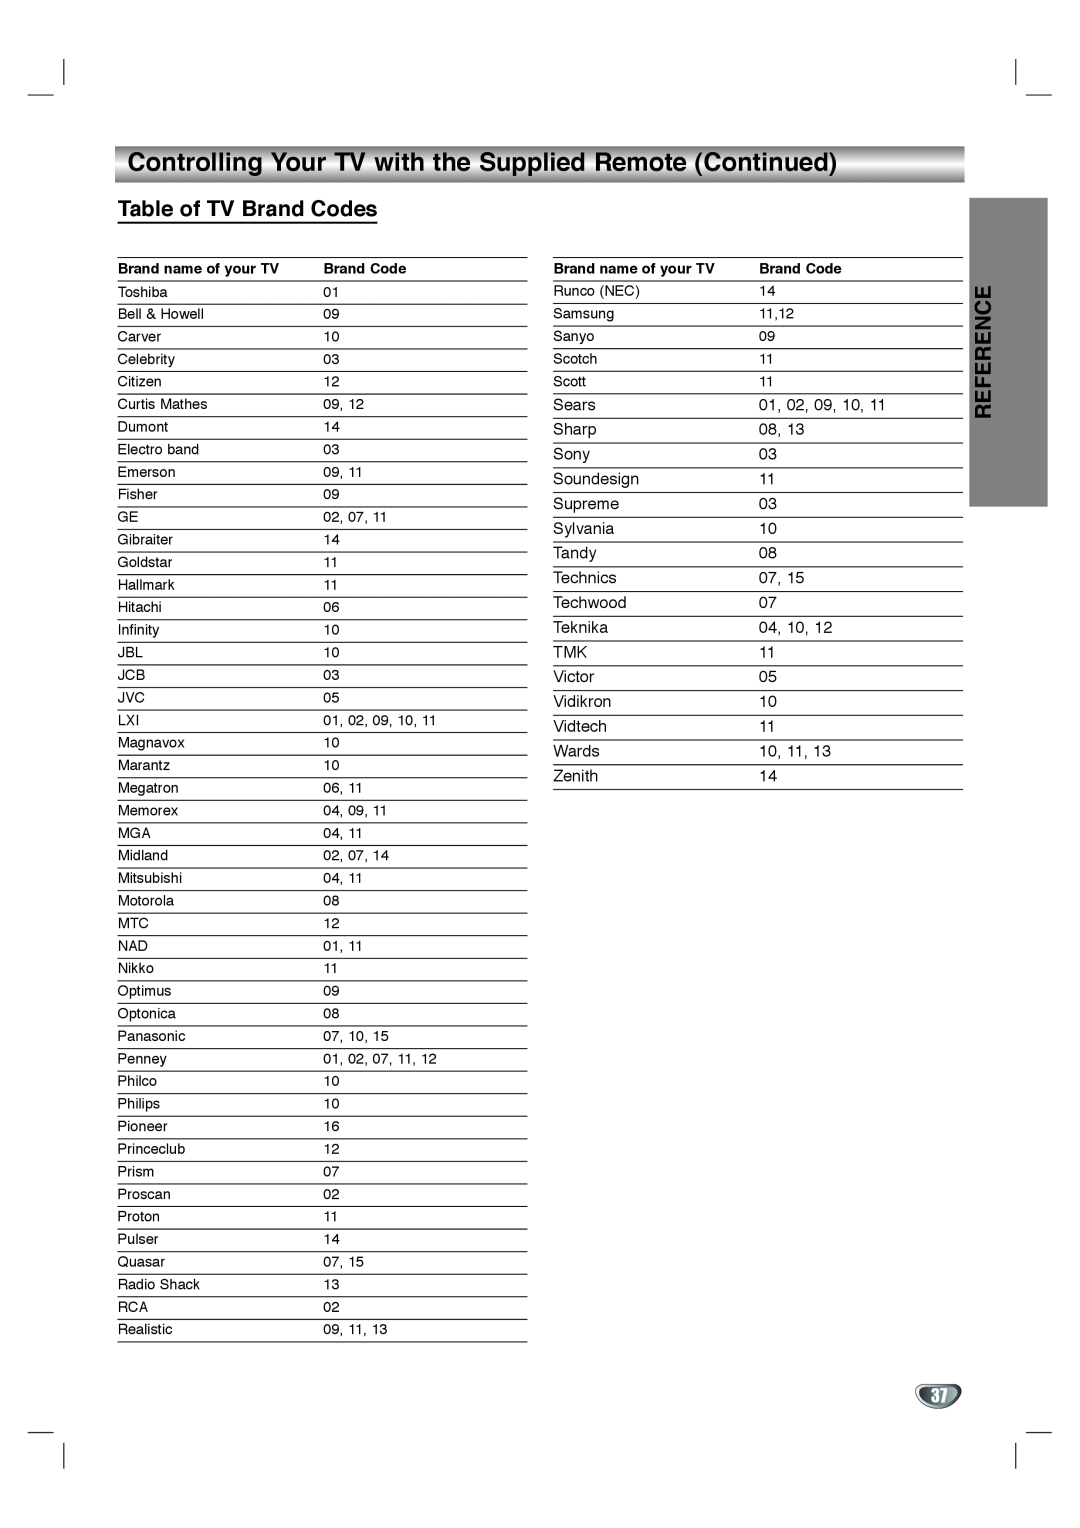 Toshiba SD-K530SU owner manual Table of TV Brand Codes 